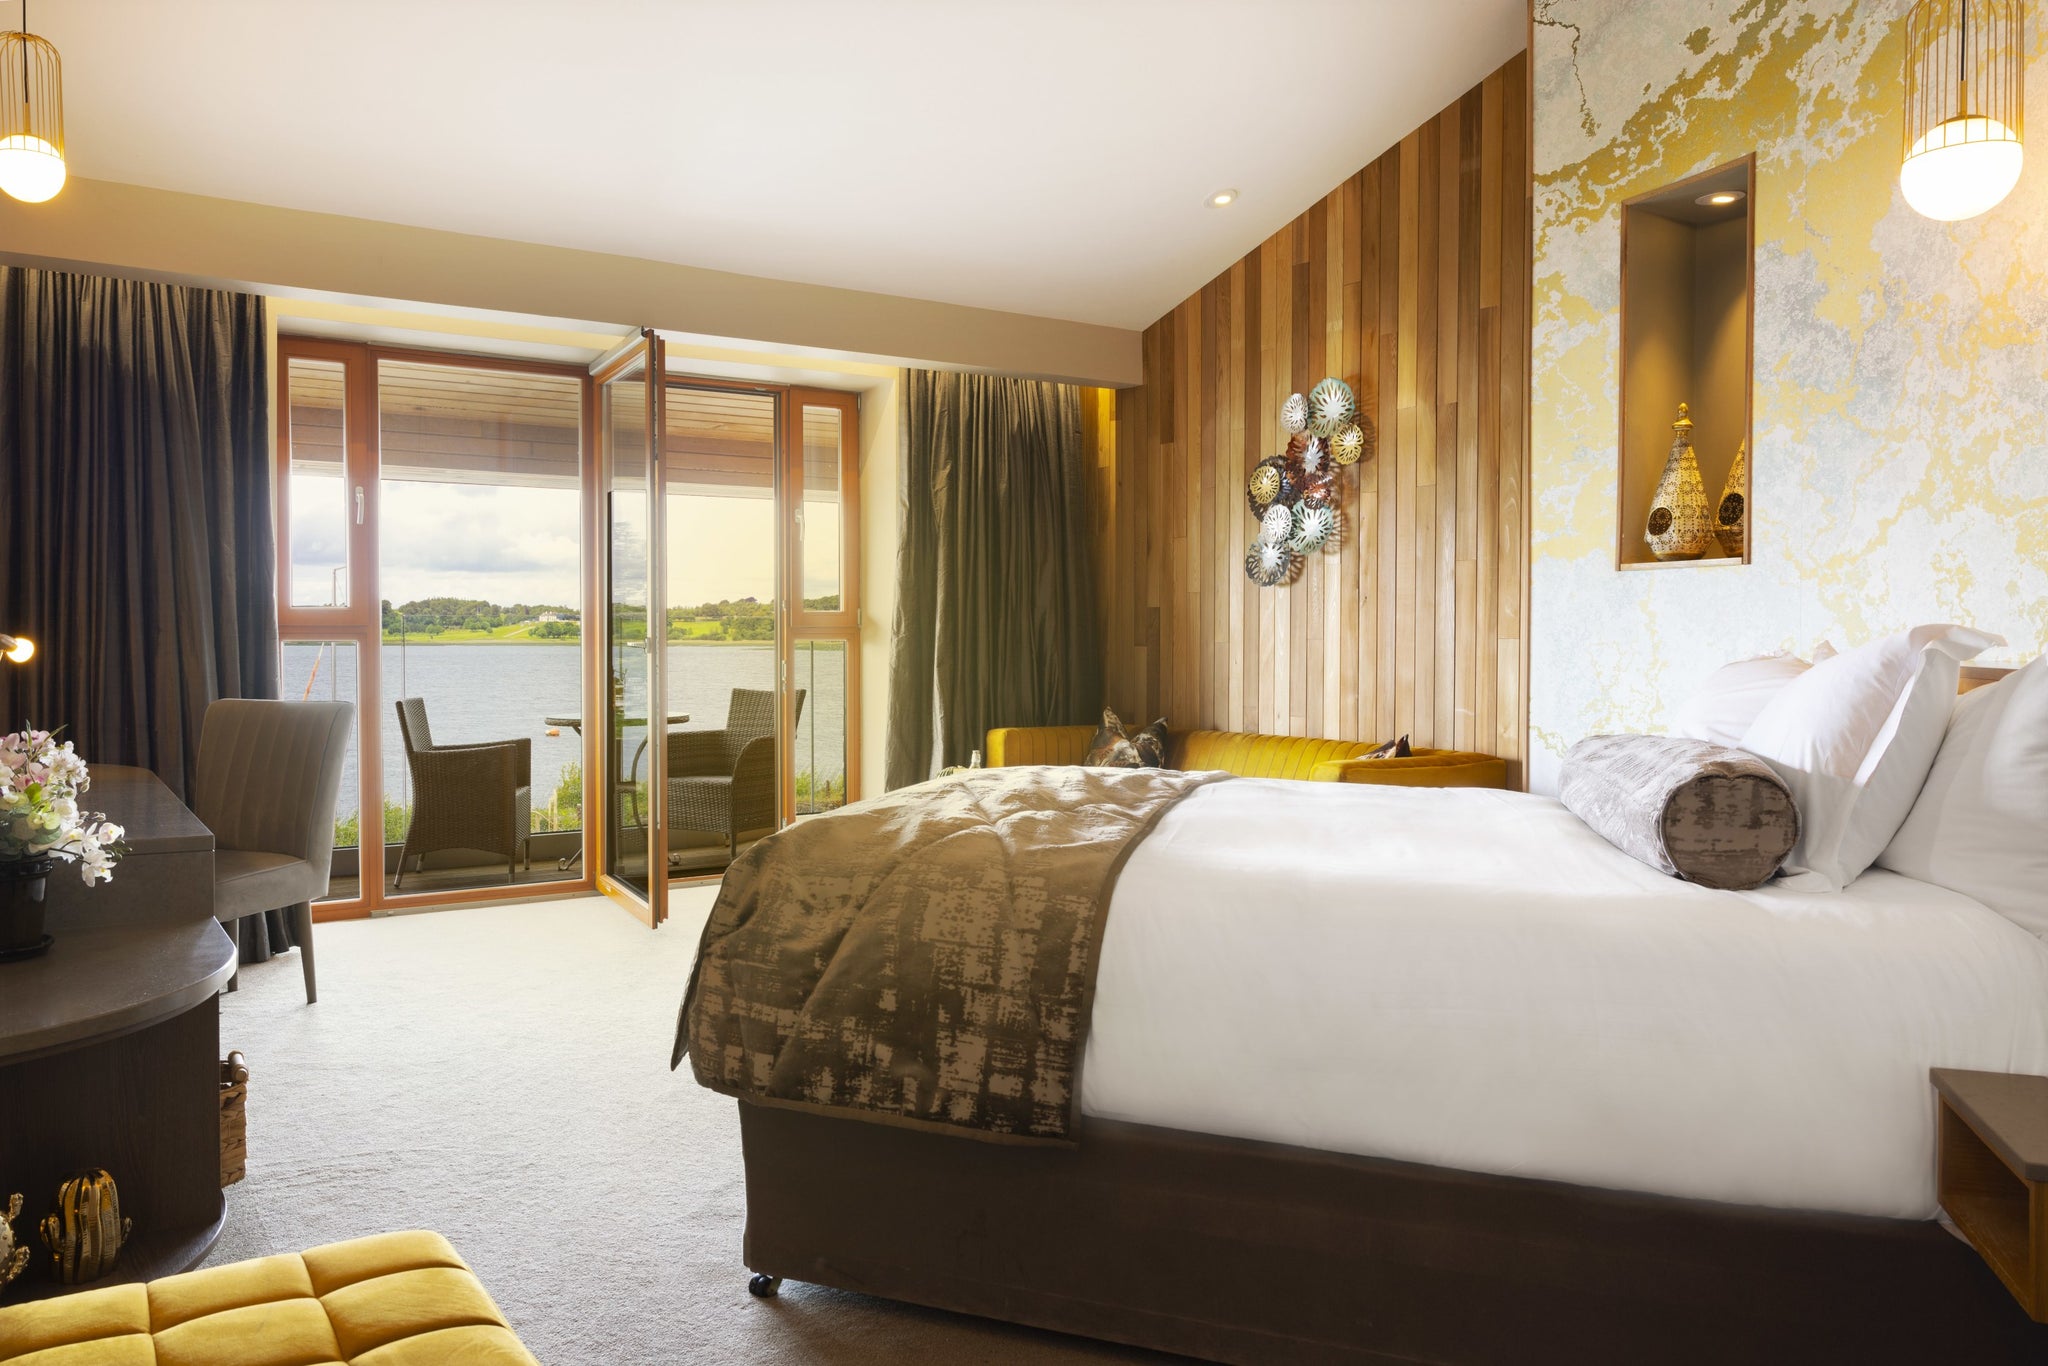 Bedroom-at-Wineport-lodge-and-spa